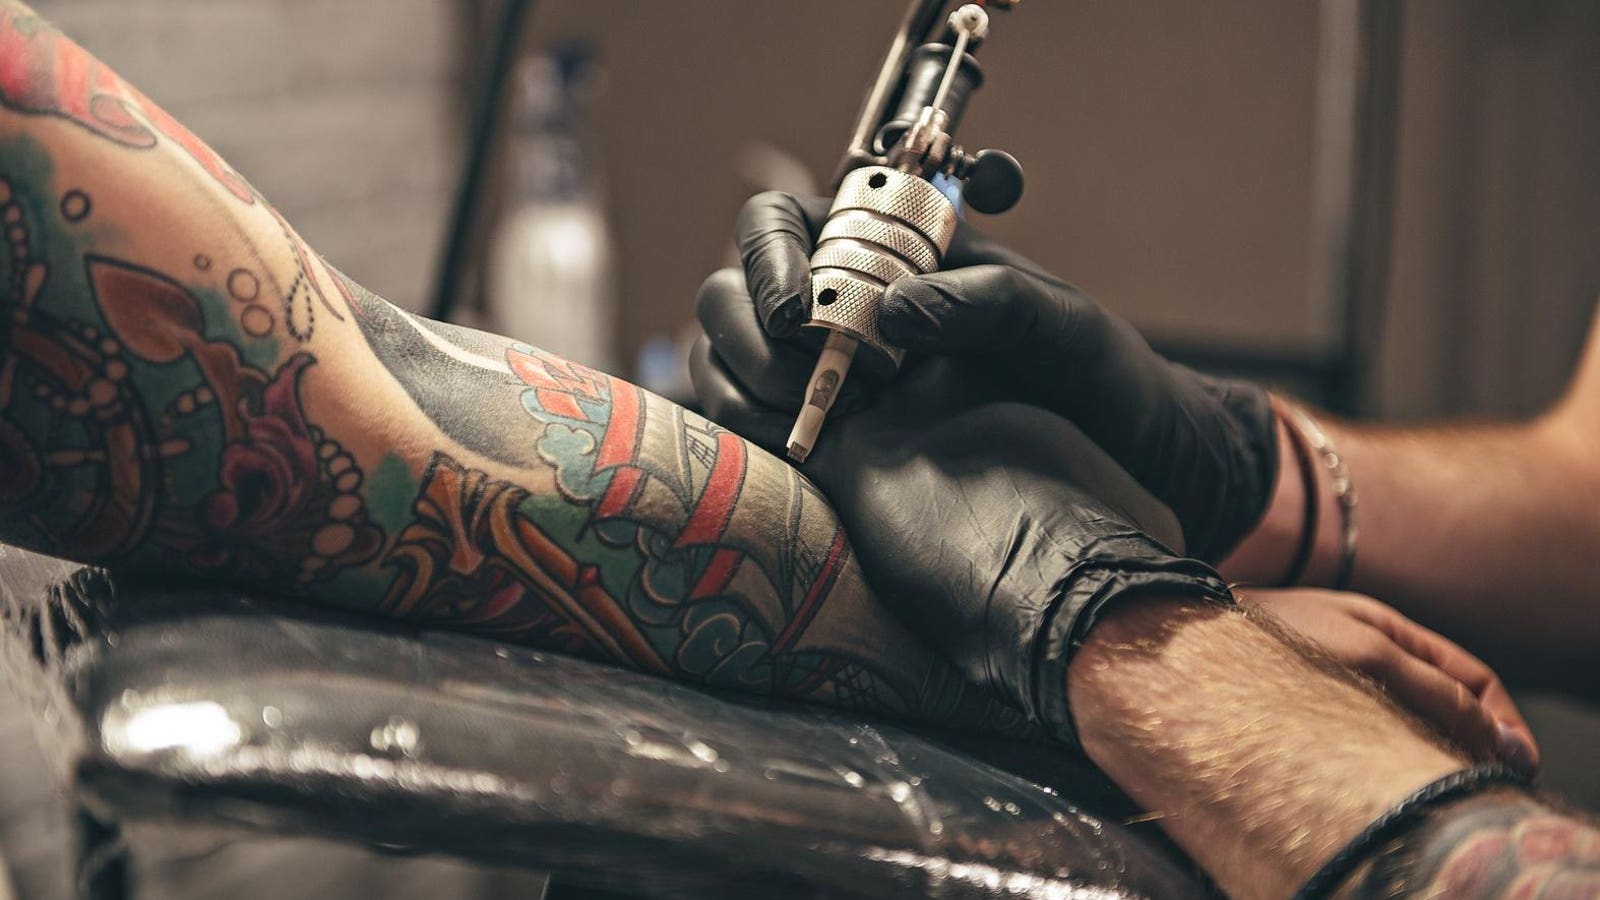 Bacteria Found In Several Tattoo Ink Brands, Study Suggests